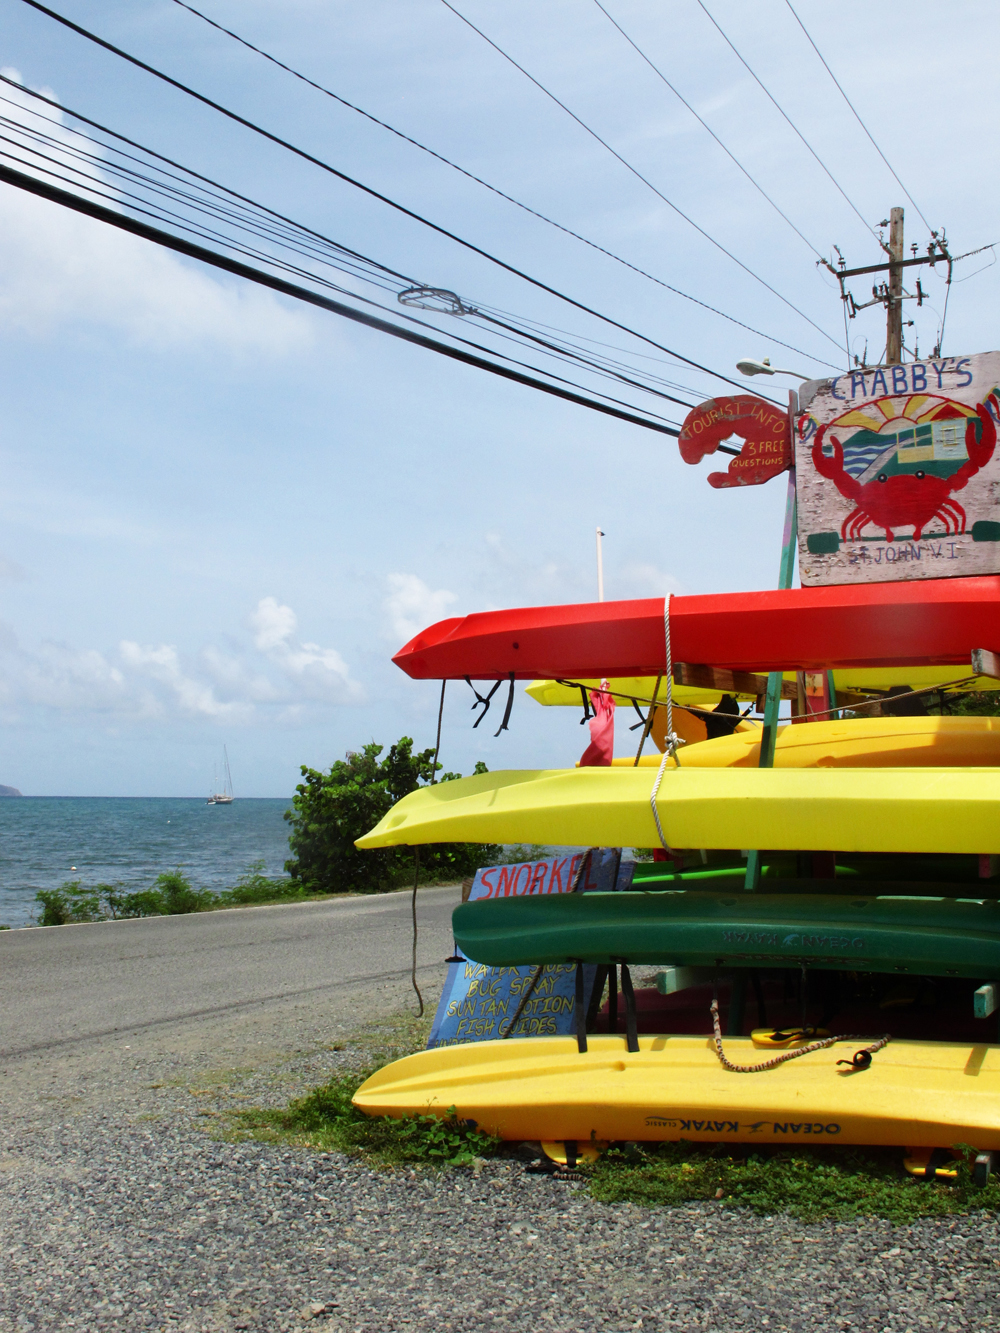 Crabbys Kayaks, the largest tour shop in Coral Bay